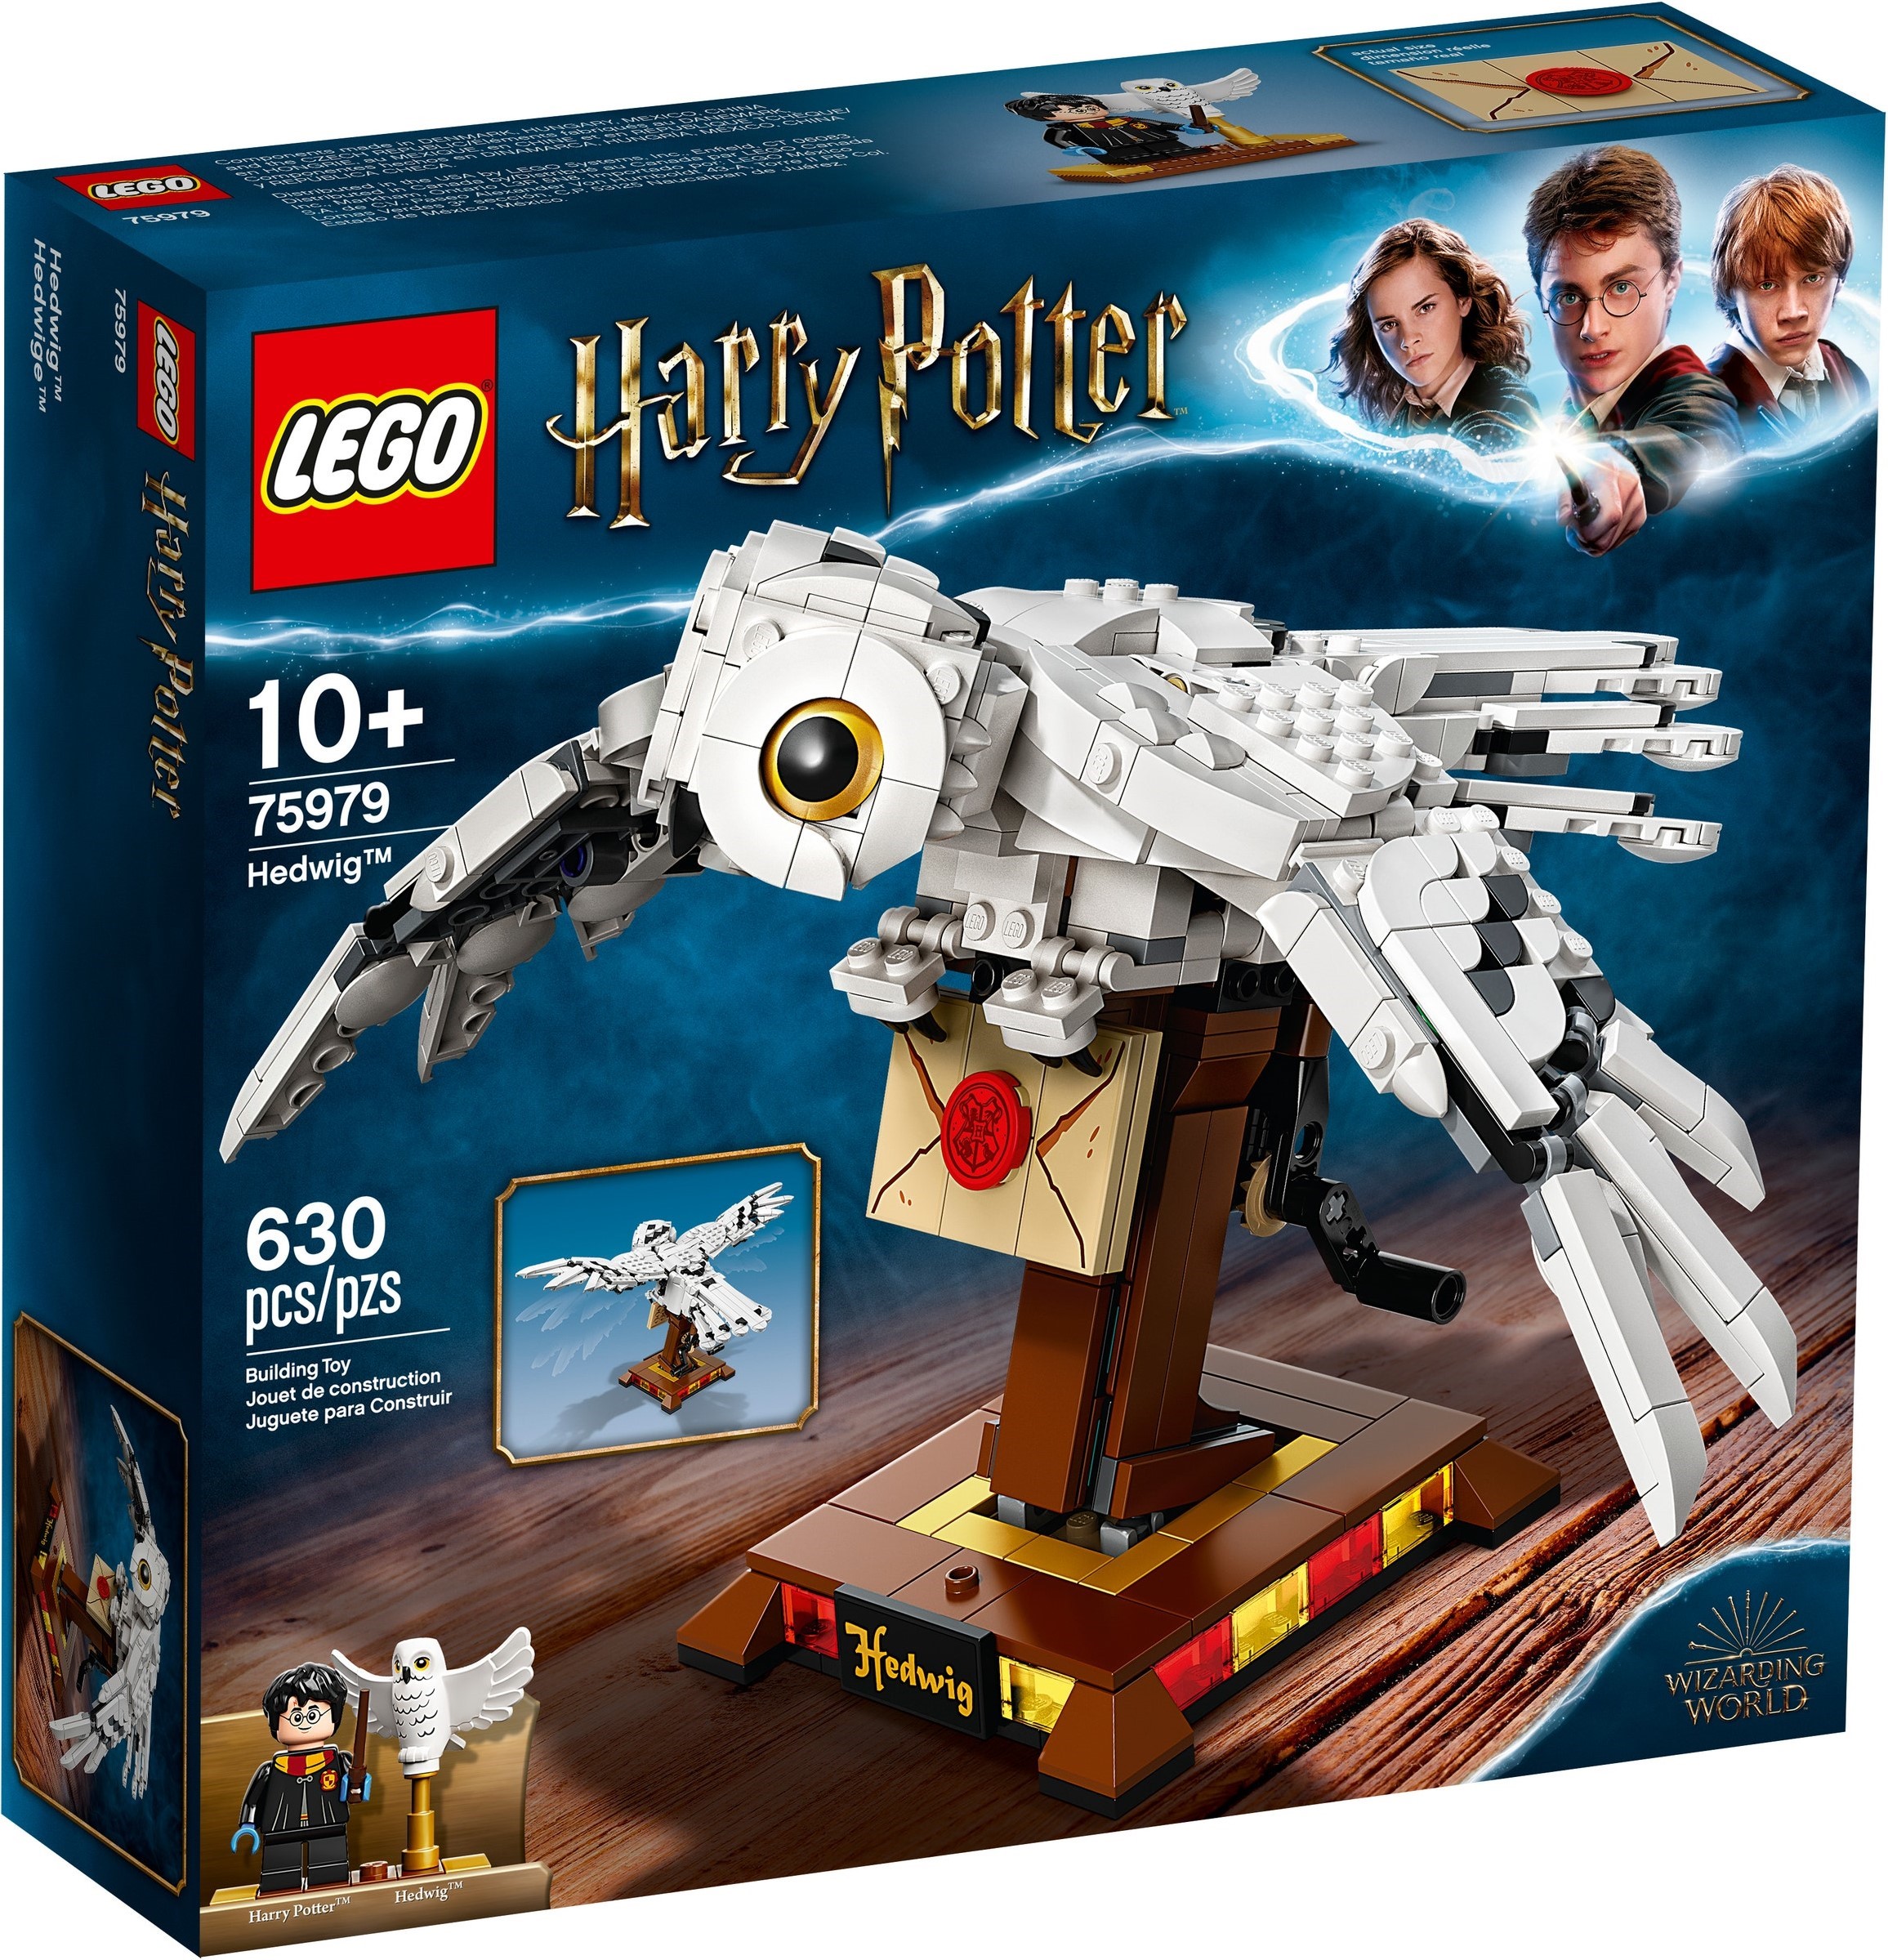 Polybag Sealed New!! LEGO Harry Potter and Hedwig Owl Delivery Set 30420 